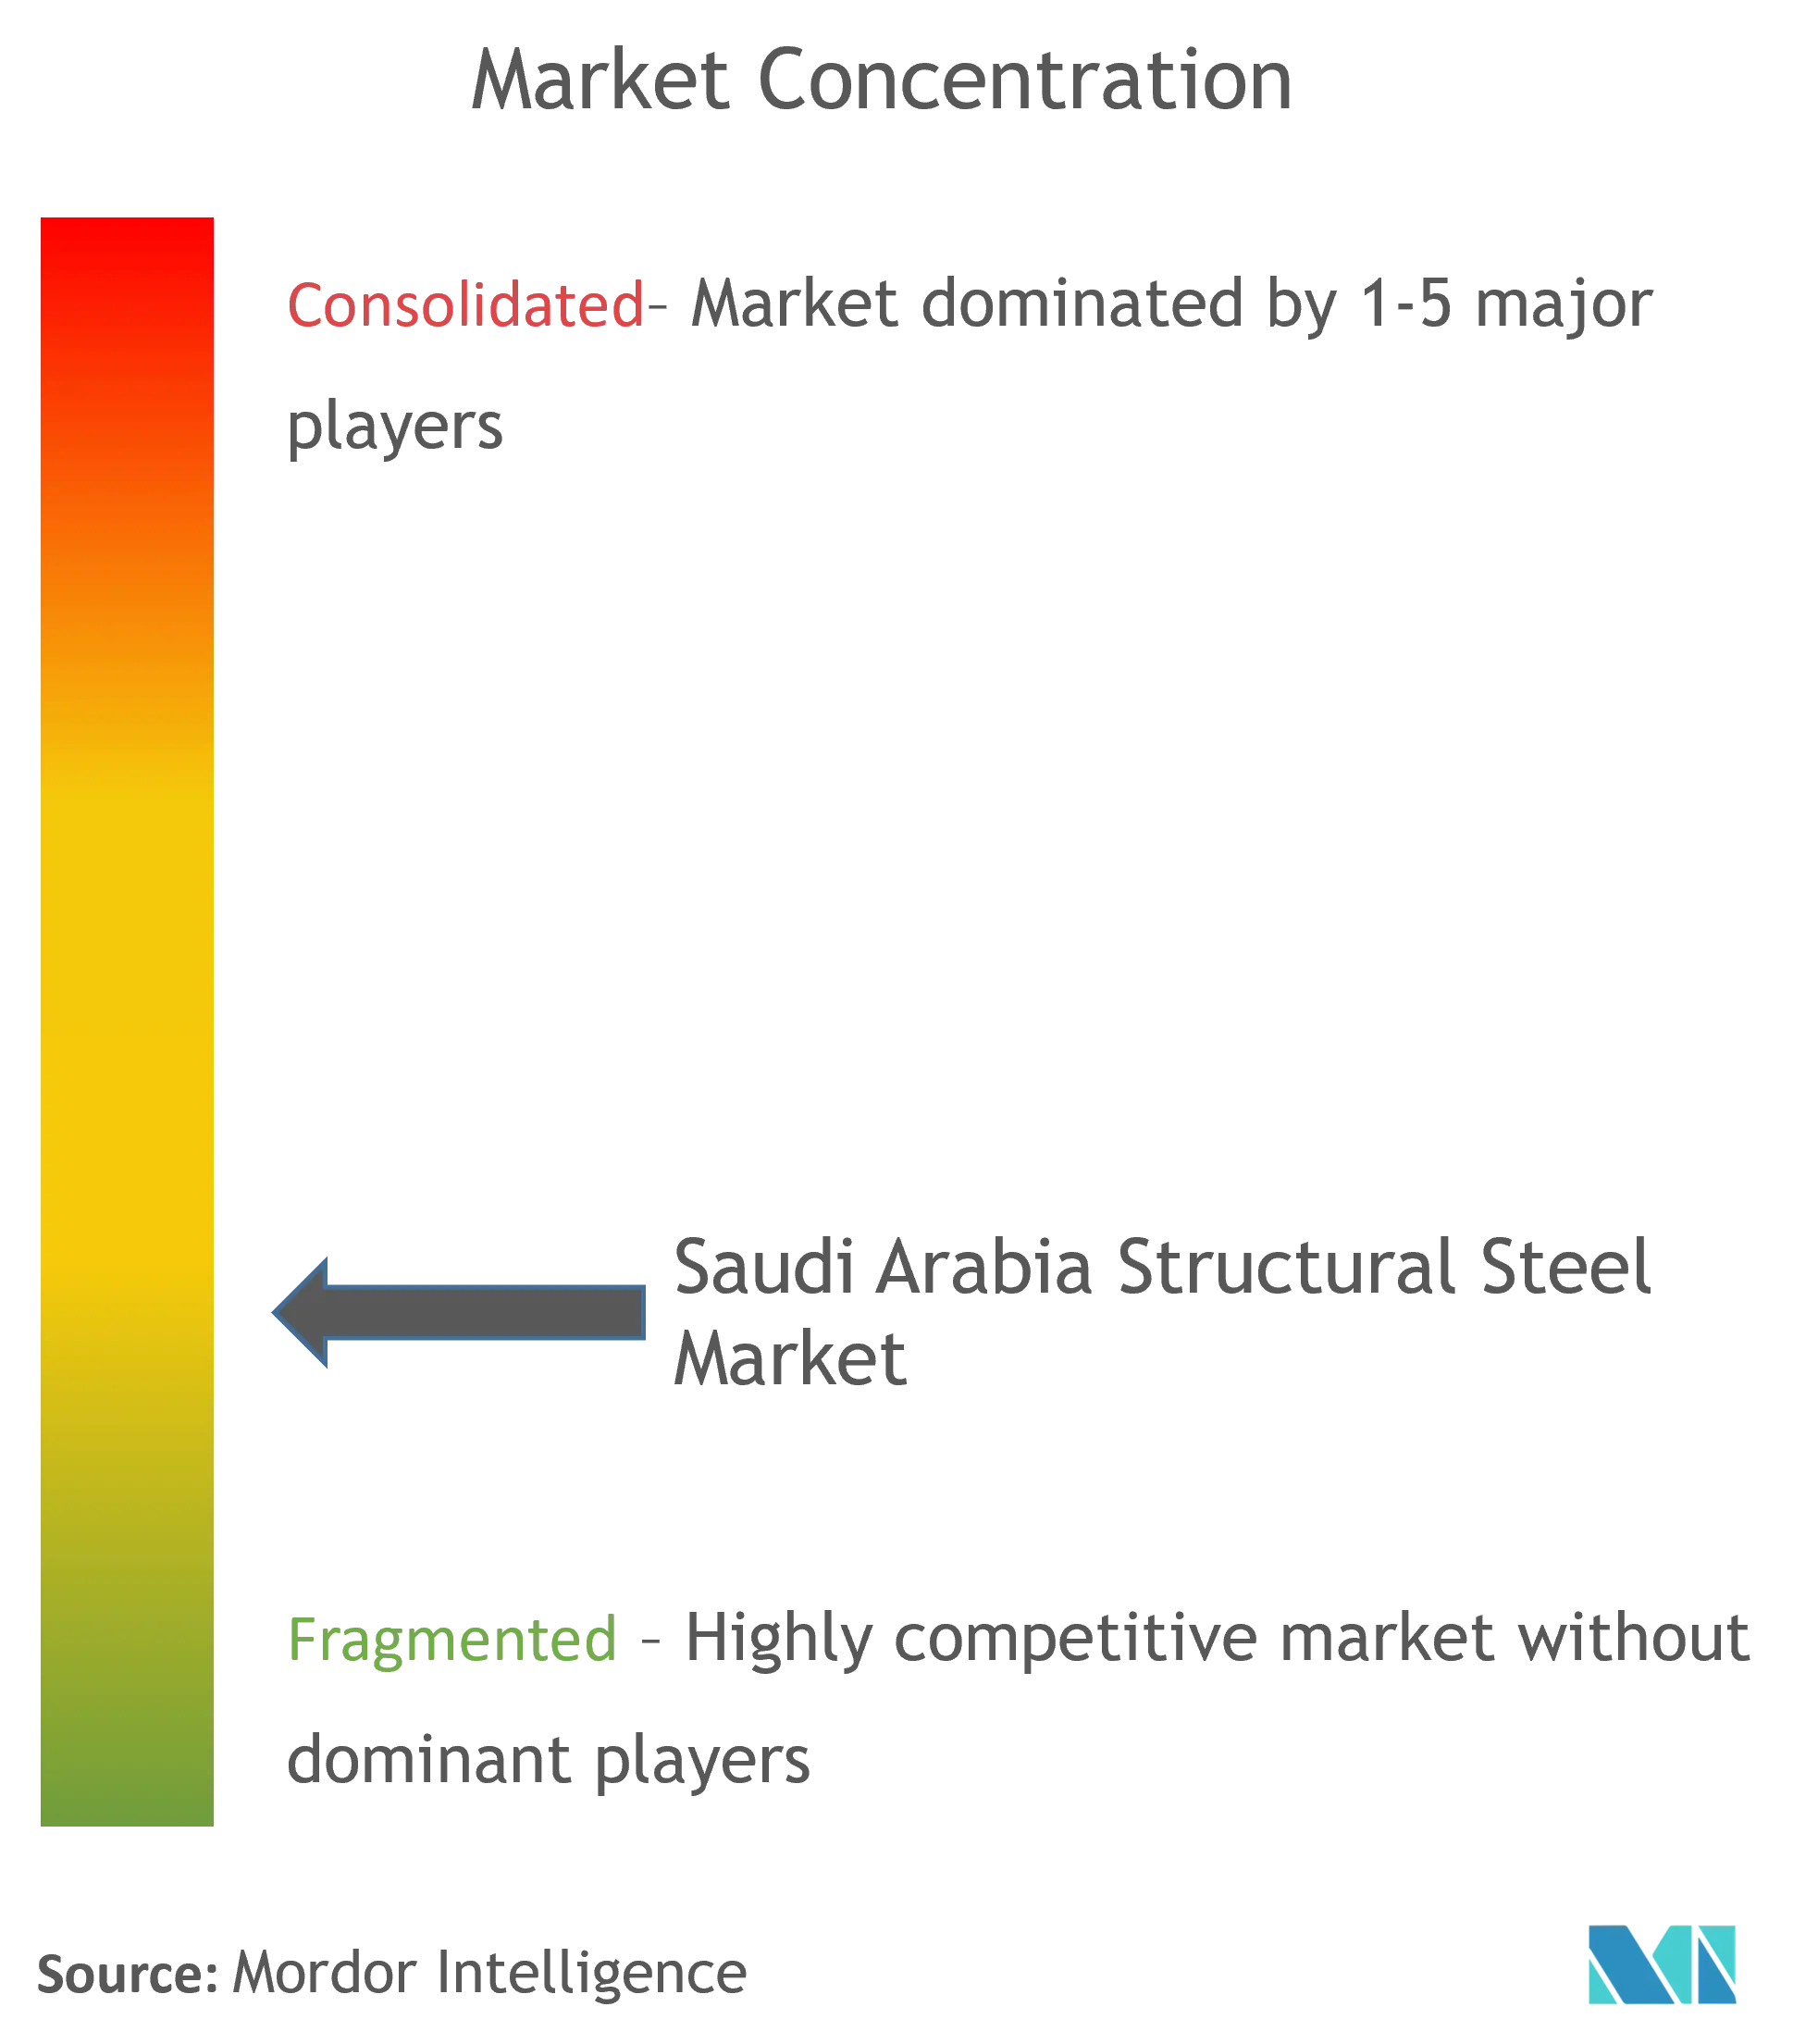 Saudi Arabia Structural Steel Fabrication Market Concentration